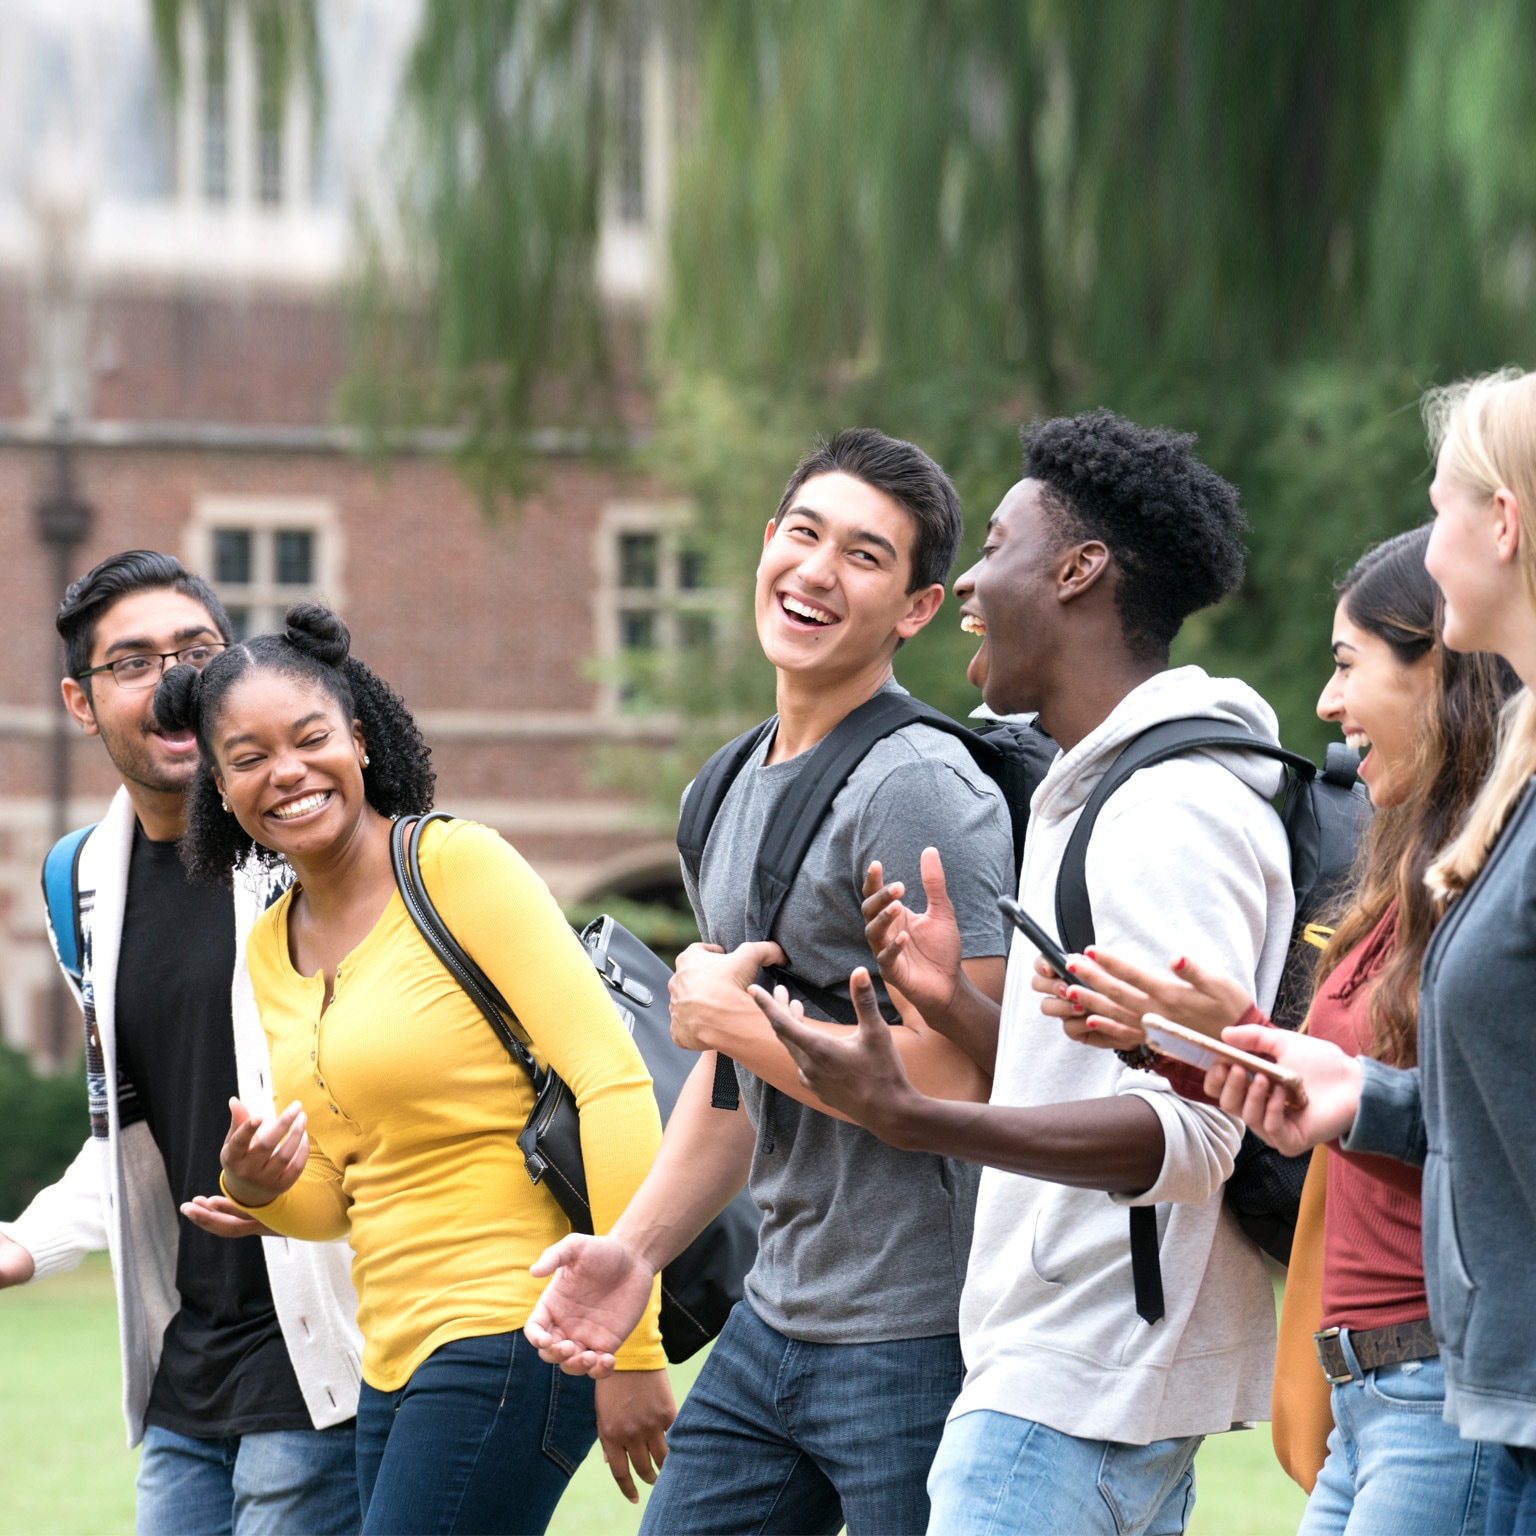 Image of a group of college students on a campus